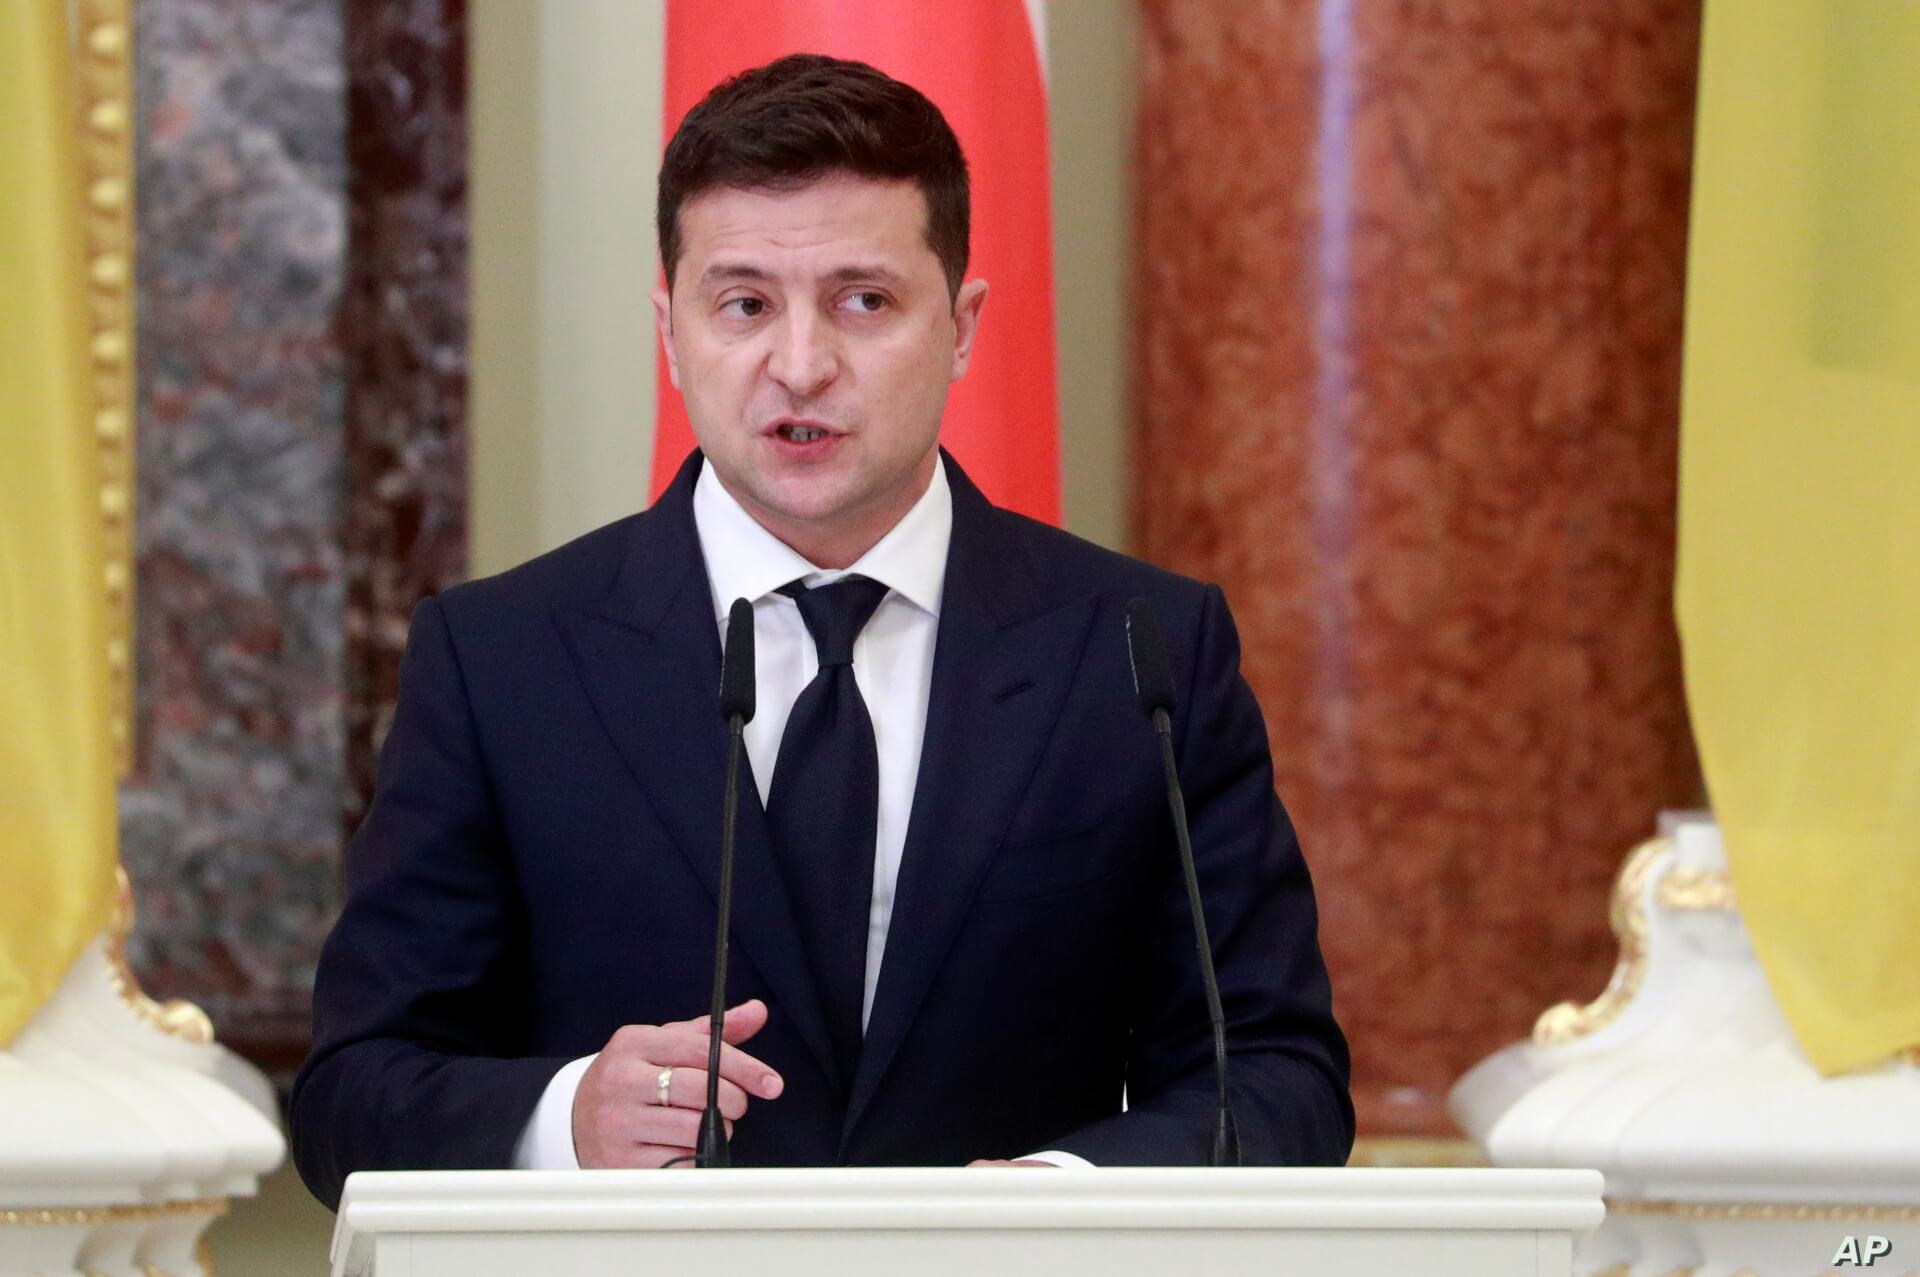 Zelensky Says Russian Passports in Eastern Ukraine Is “First Step” Towards Annexation